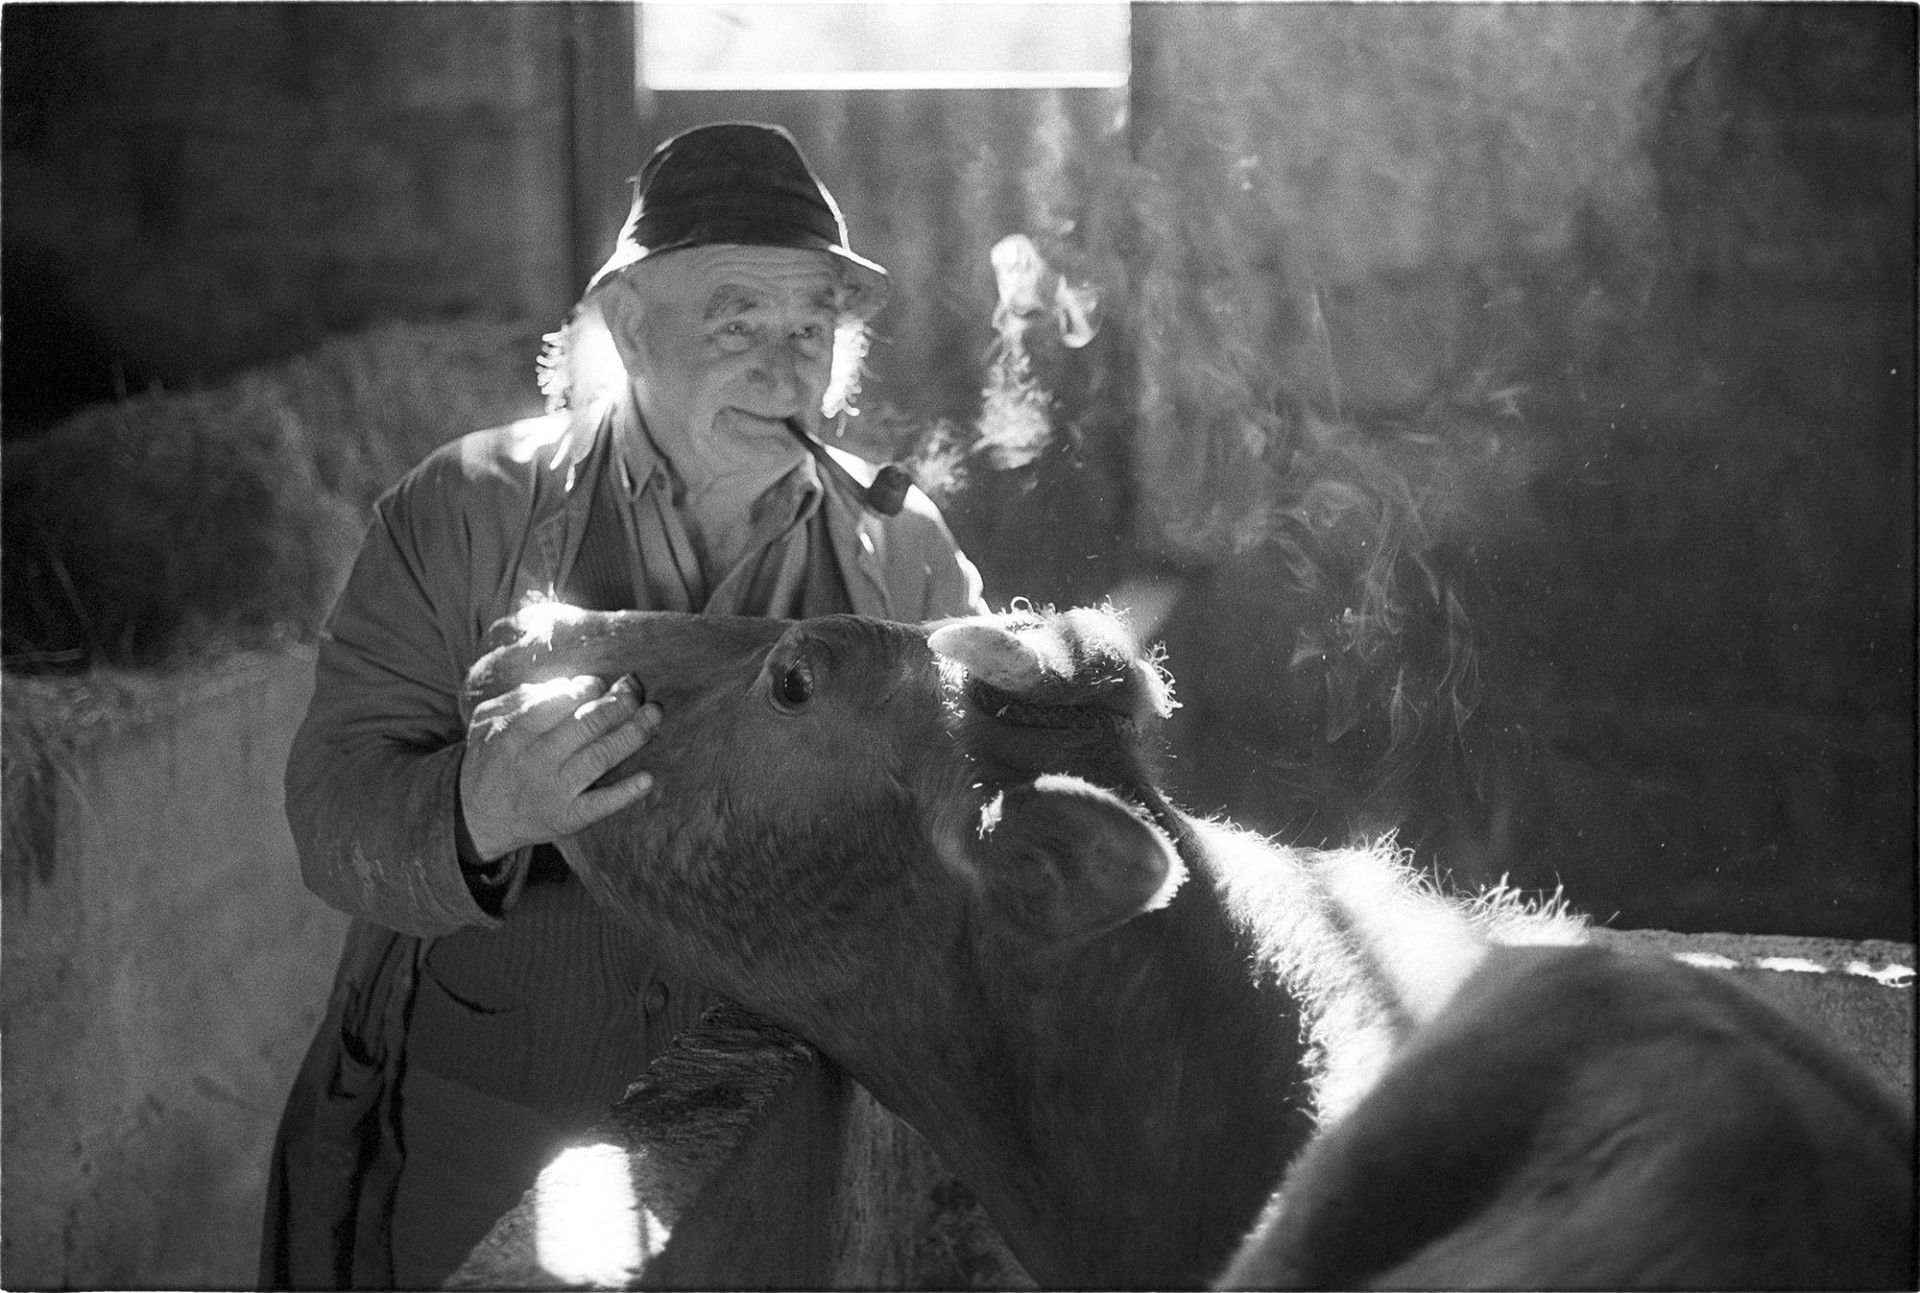 Farmer in sunlit shed with cow smoking pipe, no, the farmer not the cow, silly! 
[Archie Parkhouse stroking his cow in a barn at Millhams, Dolton. He is smoking a pipe and the smoke is visible in the sunlight coming in through the gap above the barn doorway.]